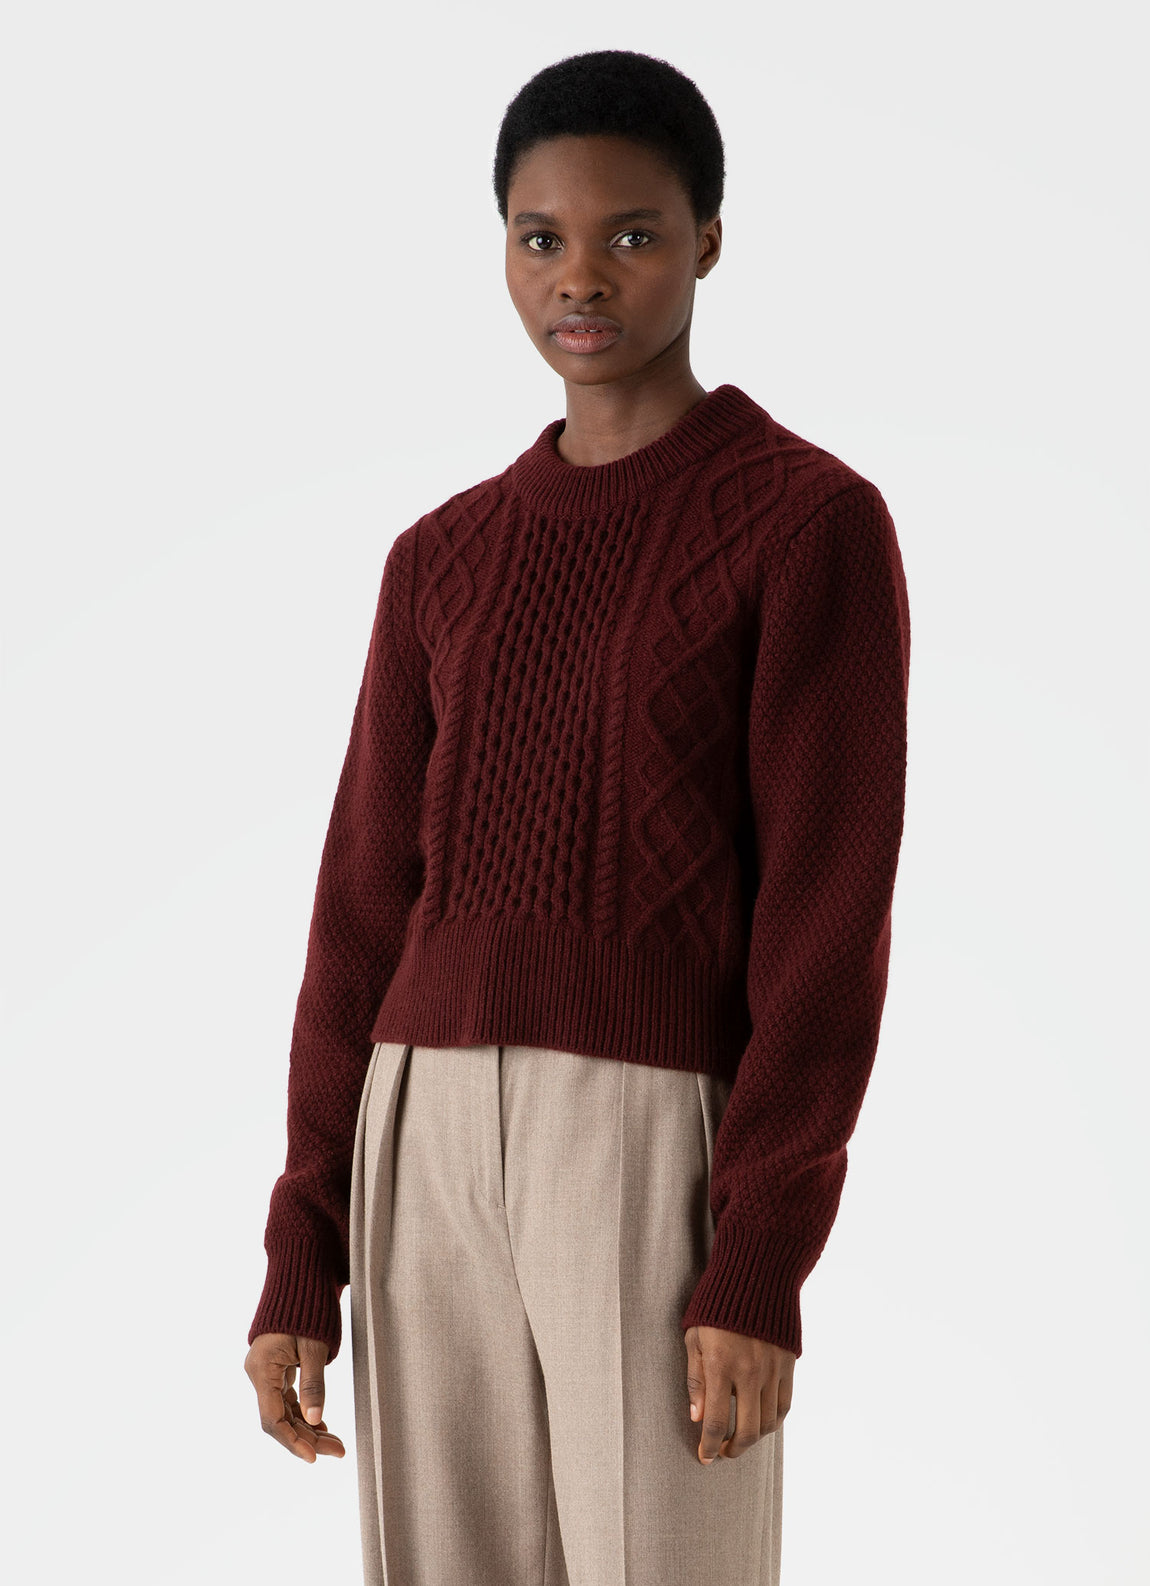 Women's Cable Knit Jumper in Maroon